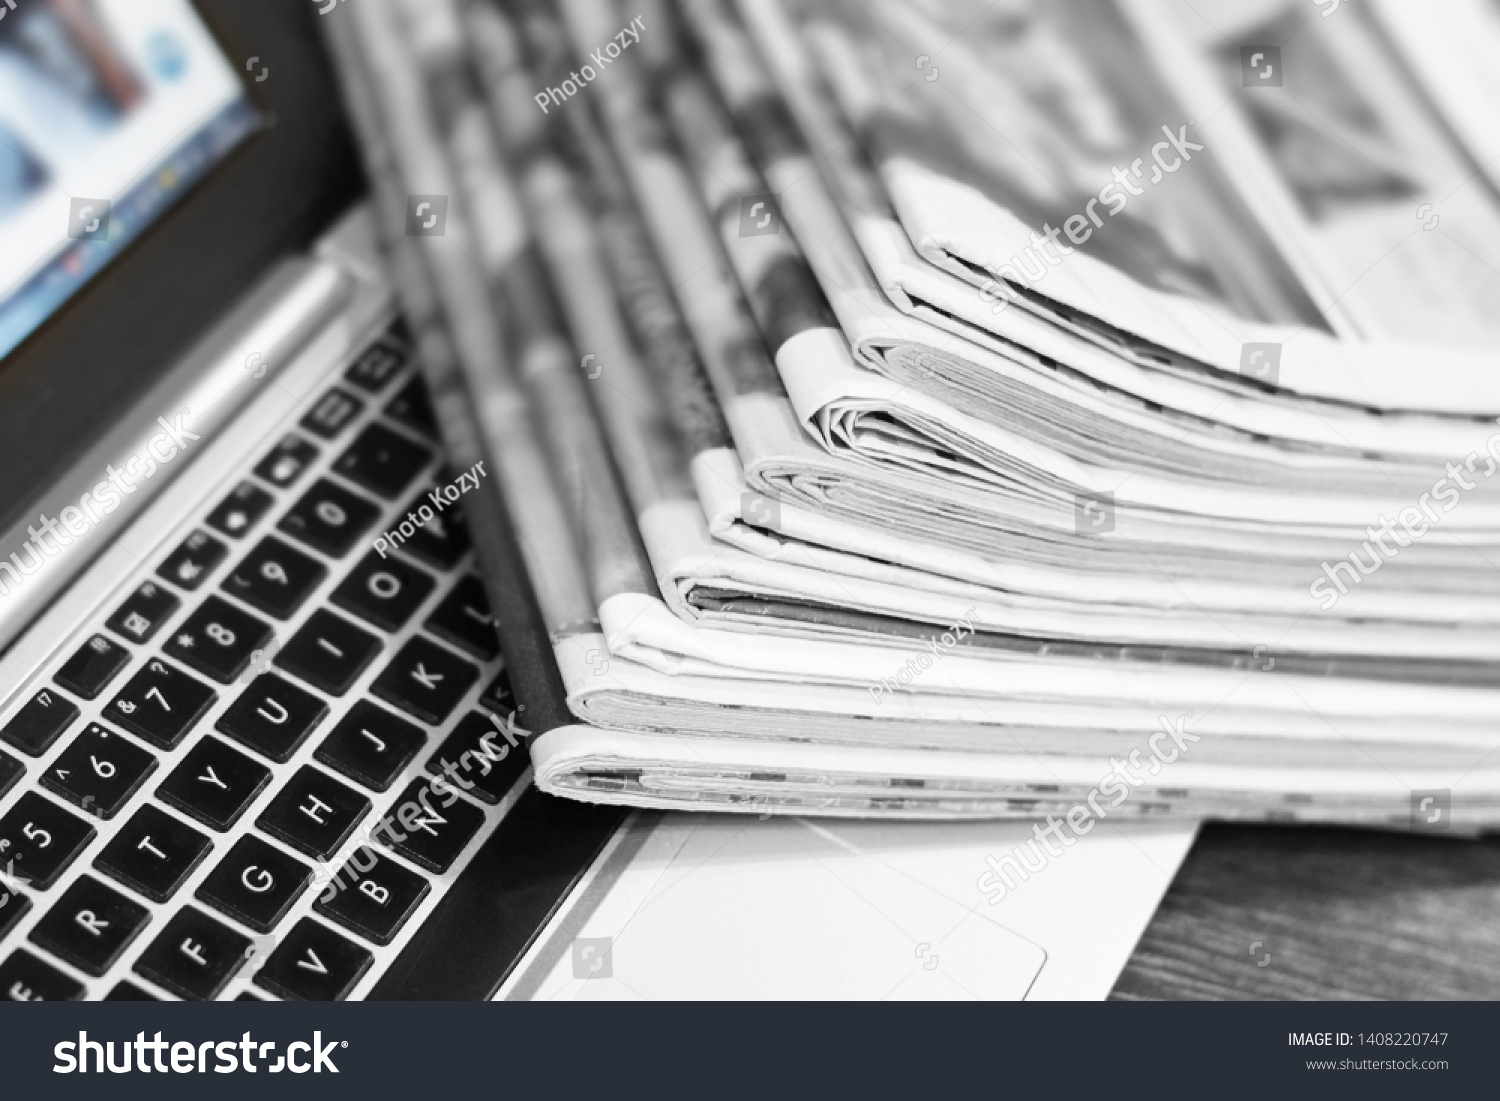 Newspapers and laptop. Pile of daily papers with news on the computer. Pages with headlines, articles folded and stacked on keypad of electronic device. Modern gadget and old journals, focus on paper  #1408220747